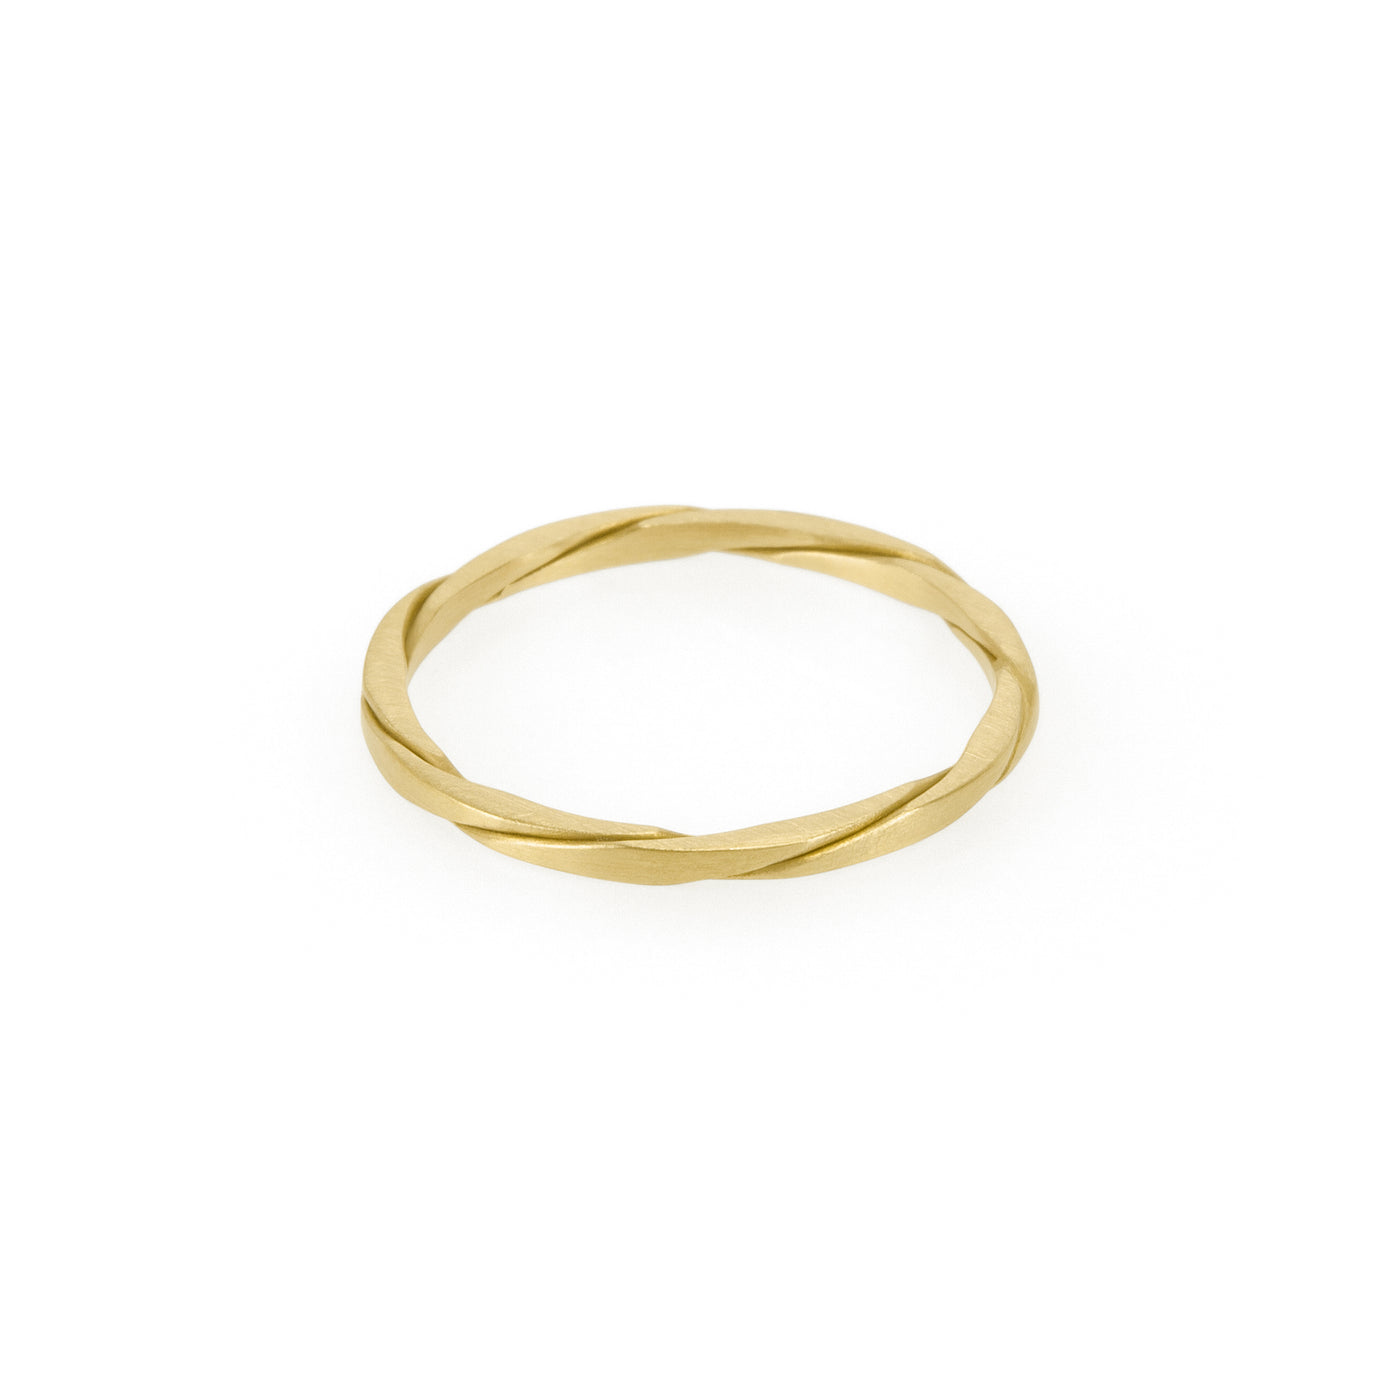 Ethical gold ring. This minimalist Twist Ring is handmade in Cape Town in recycled gold from e-waste.